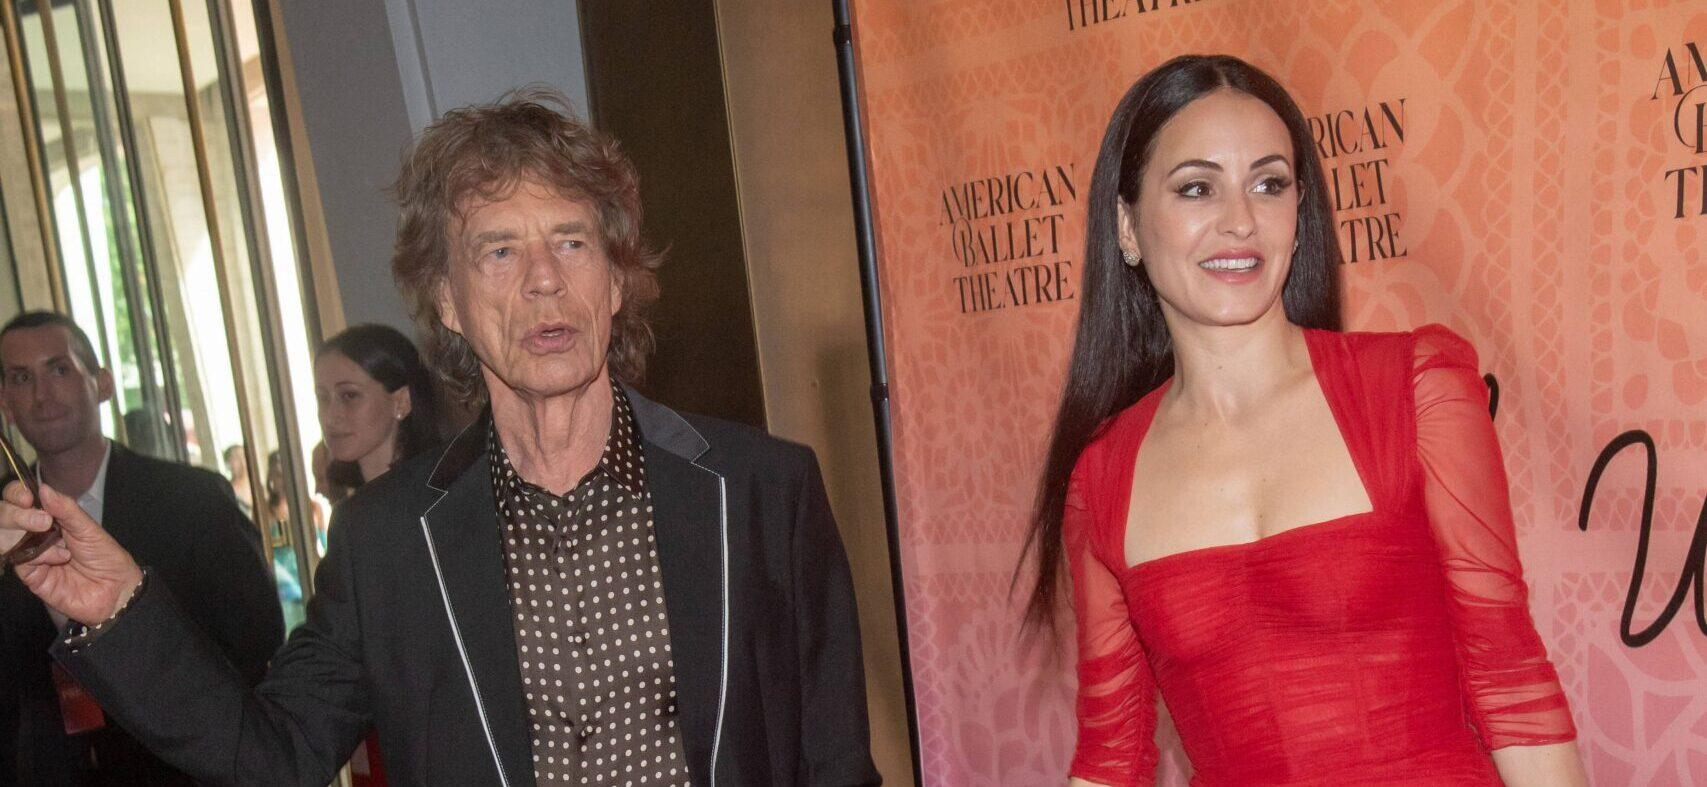 The Rolling Stones’ Mick Jagger, 79, Reportedly Engaged To 36-Year-Old Girlfriend